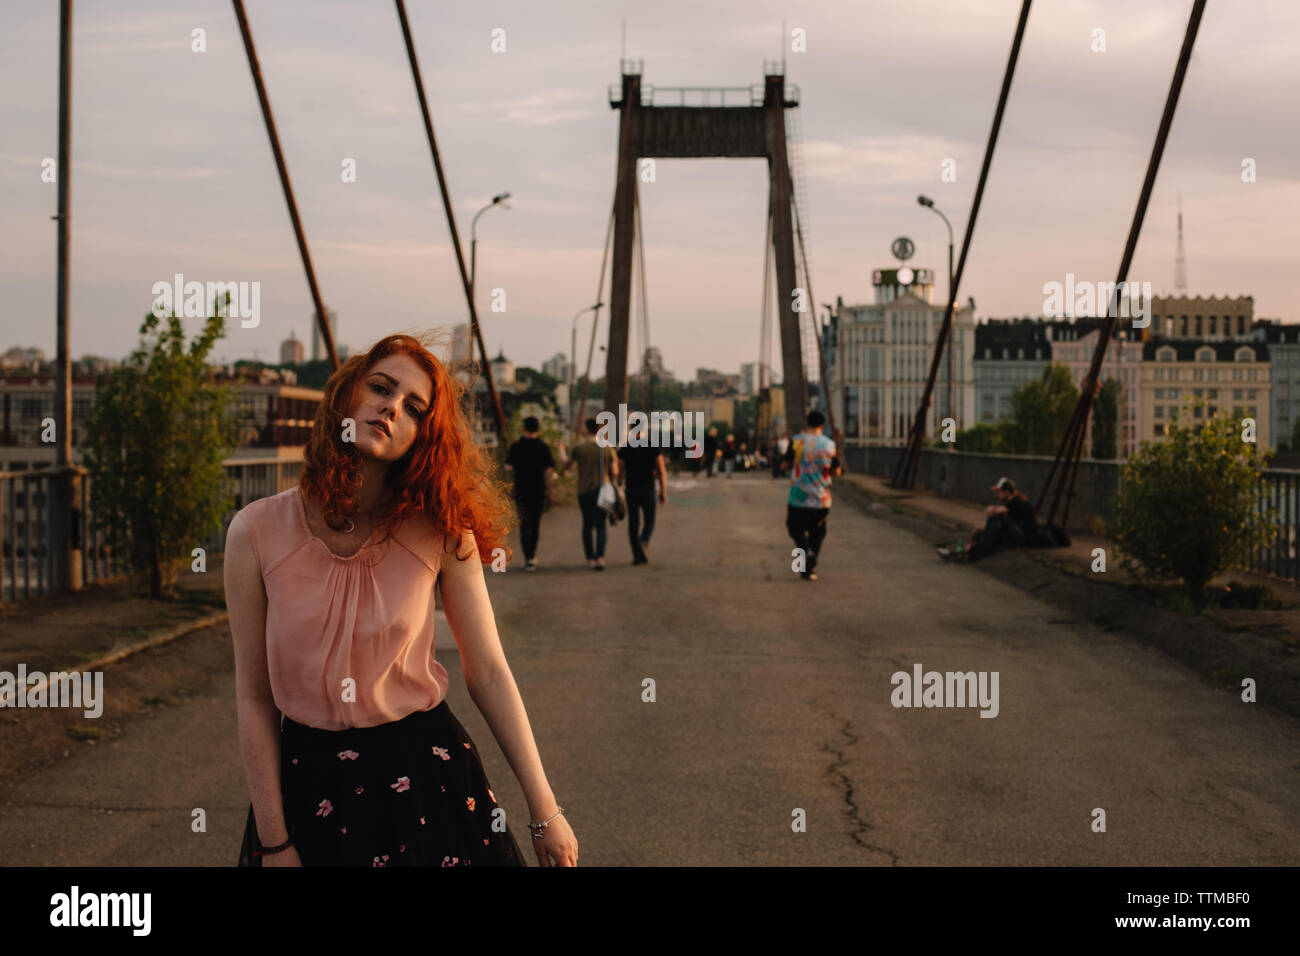 Girl with red hair walking on bridge in city Stock Photo